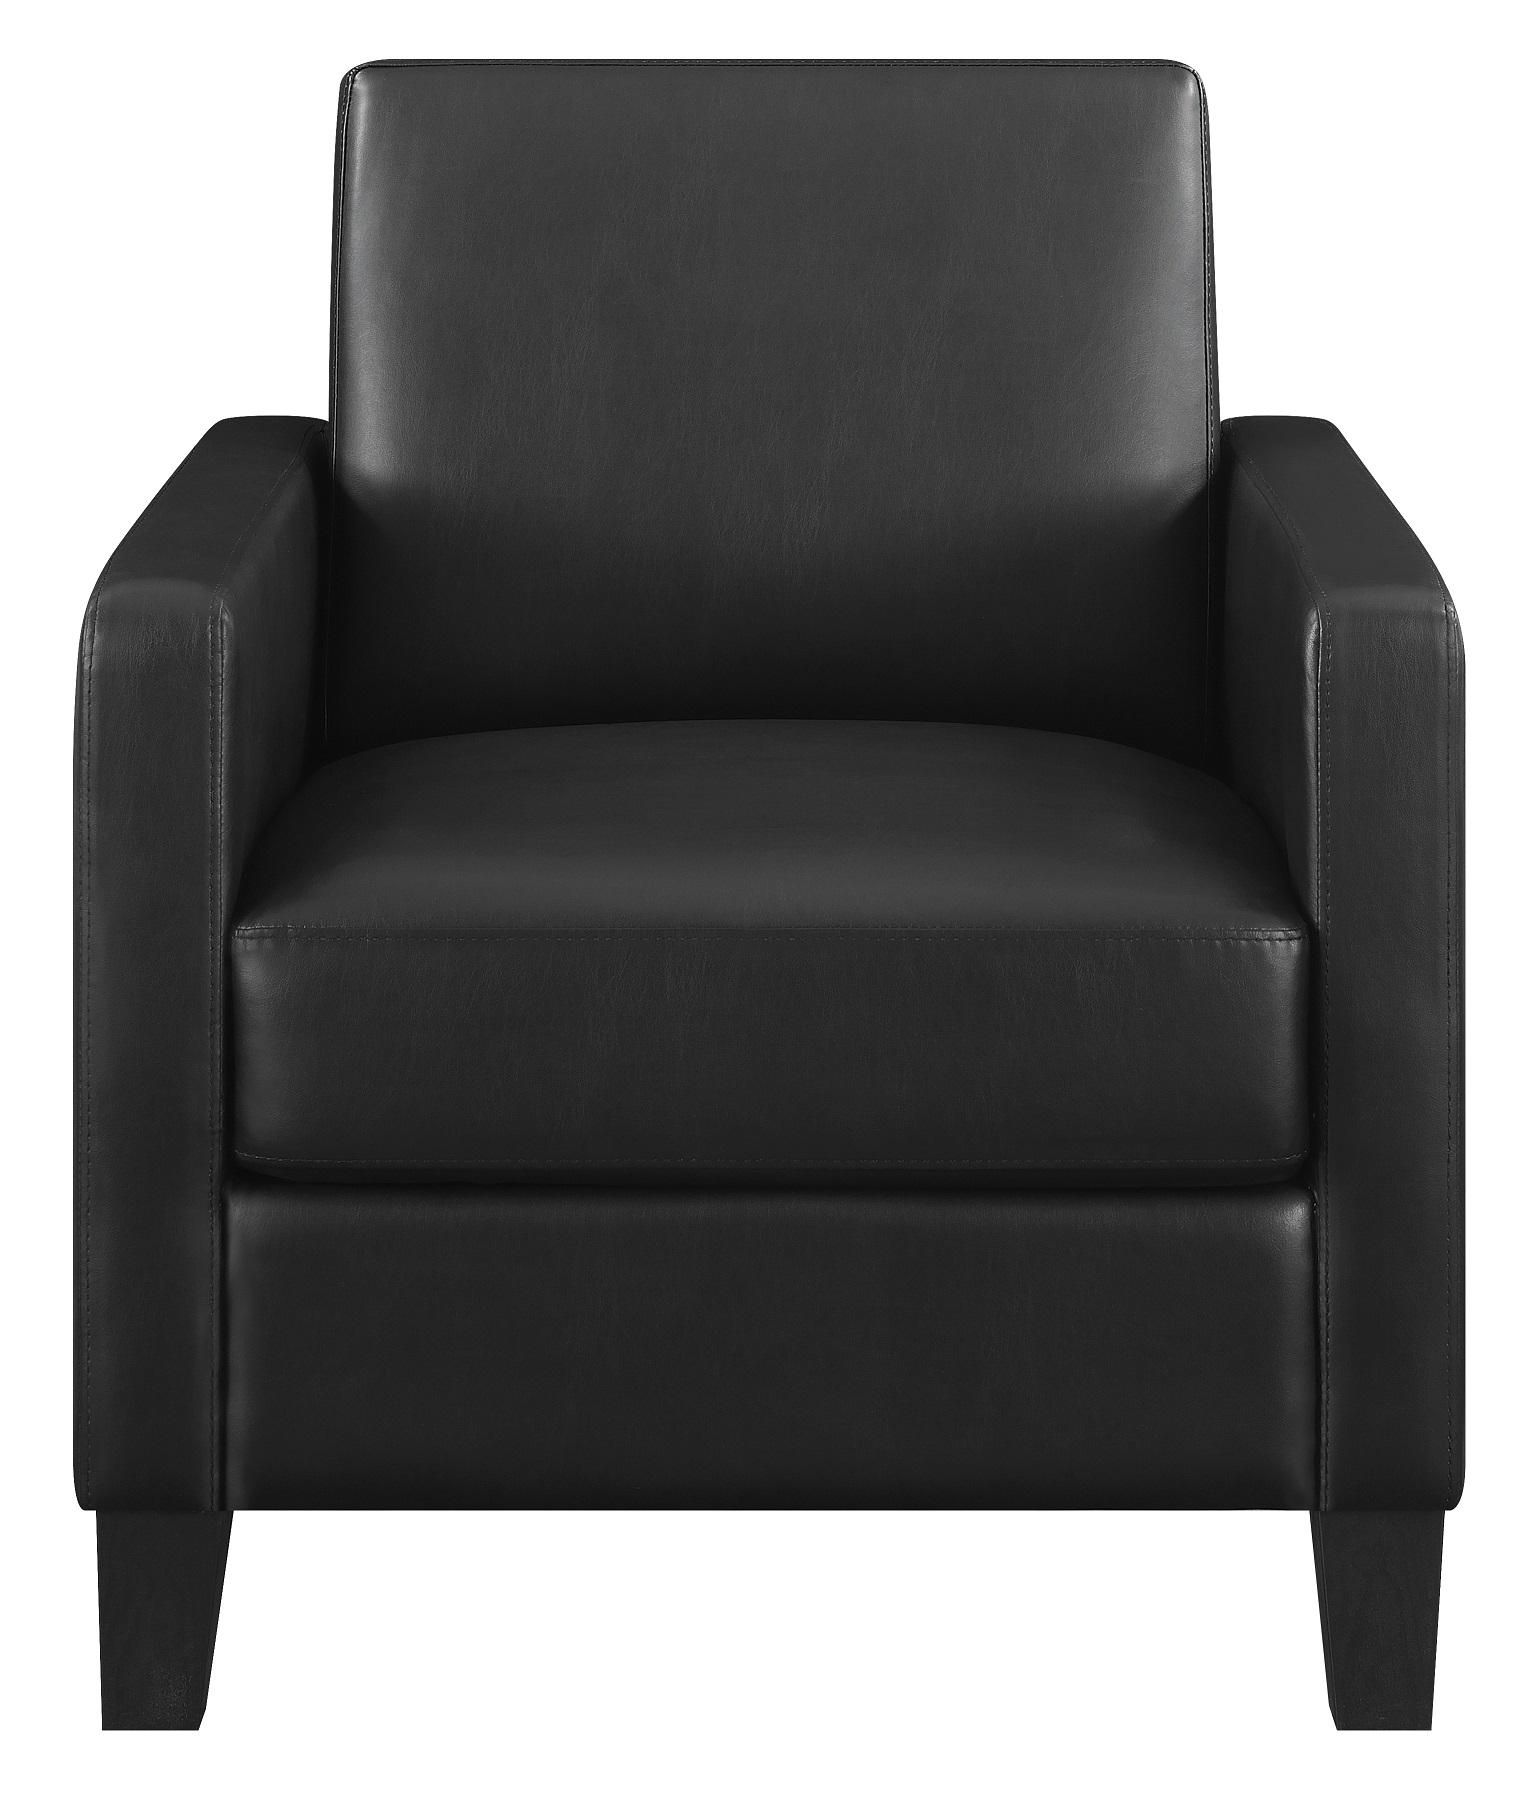 Contemporary Accent Chair 909478 909478 in Black Leatherette